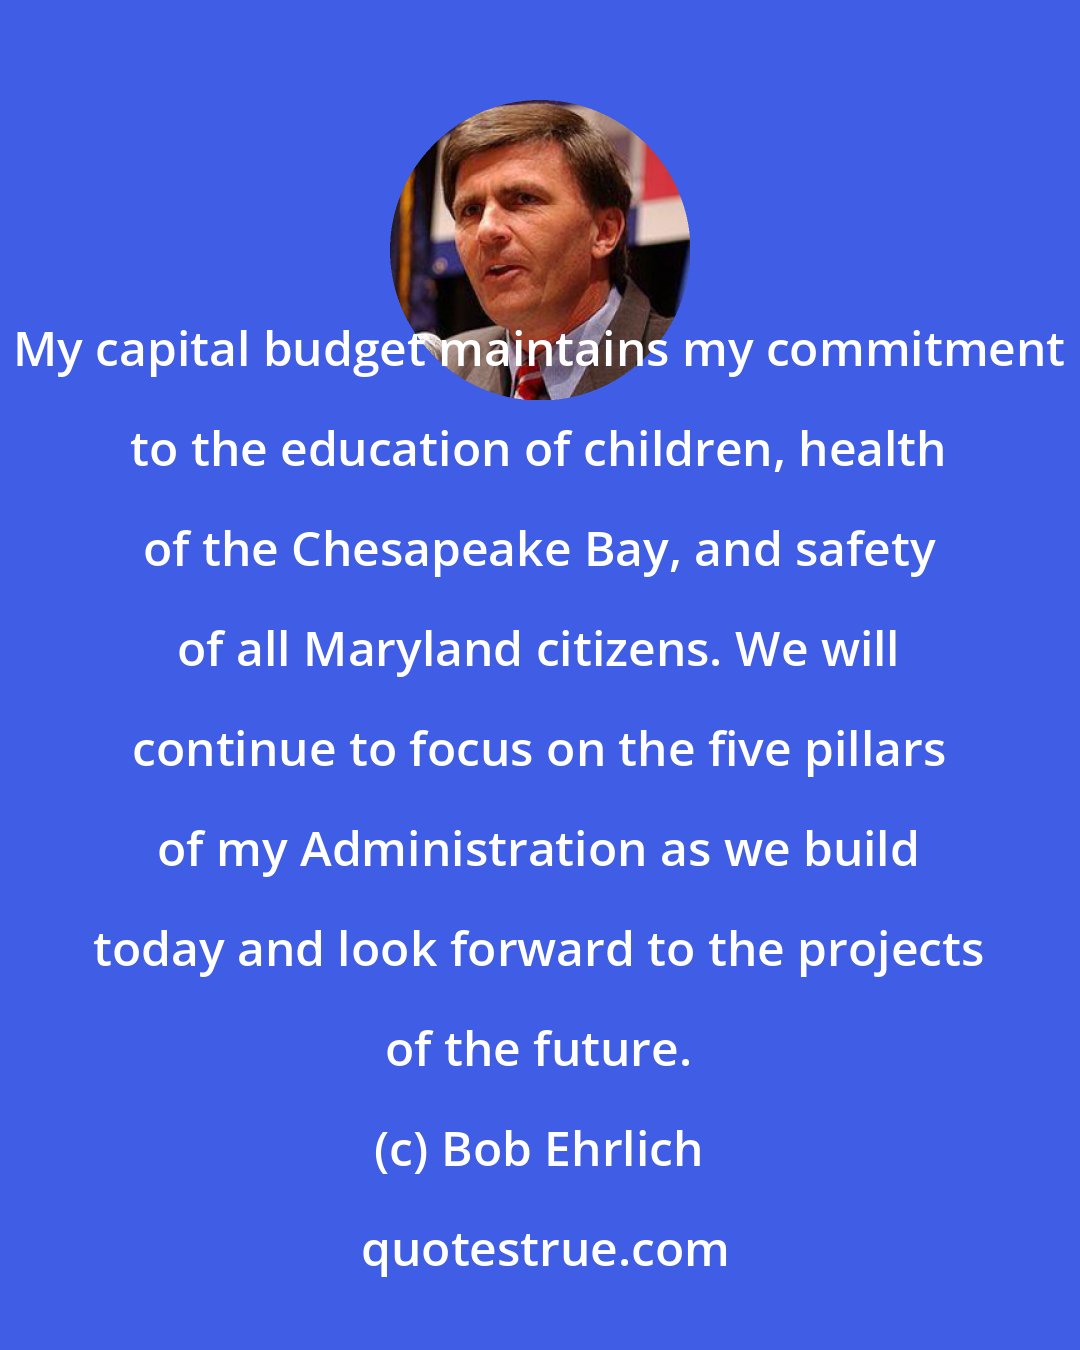 Bob Ehrlich: My capital budget maintains my commitment to the education of children, health of the Chesapeake Bay, and safety of all Maryland citizens. We will continue to focus on the five pillars of my Administration as we build today and look forward to the projects of the future.